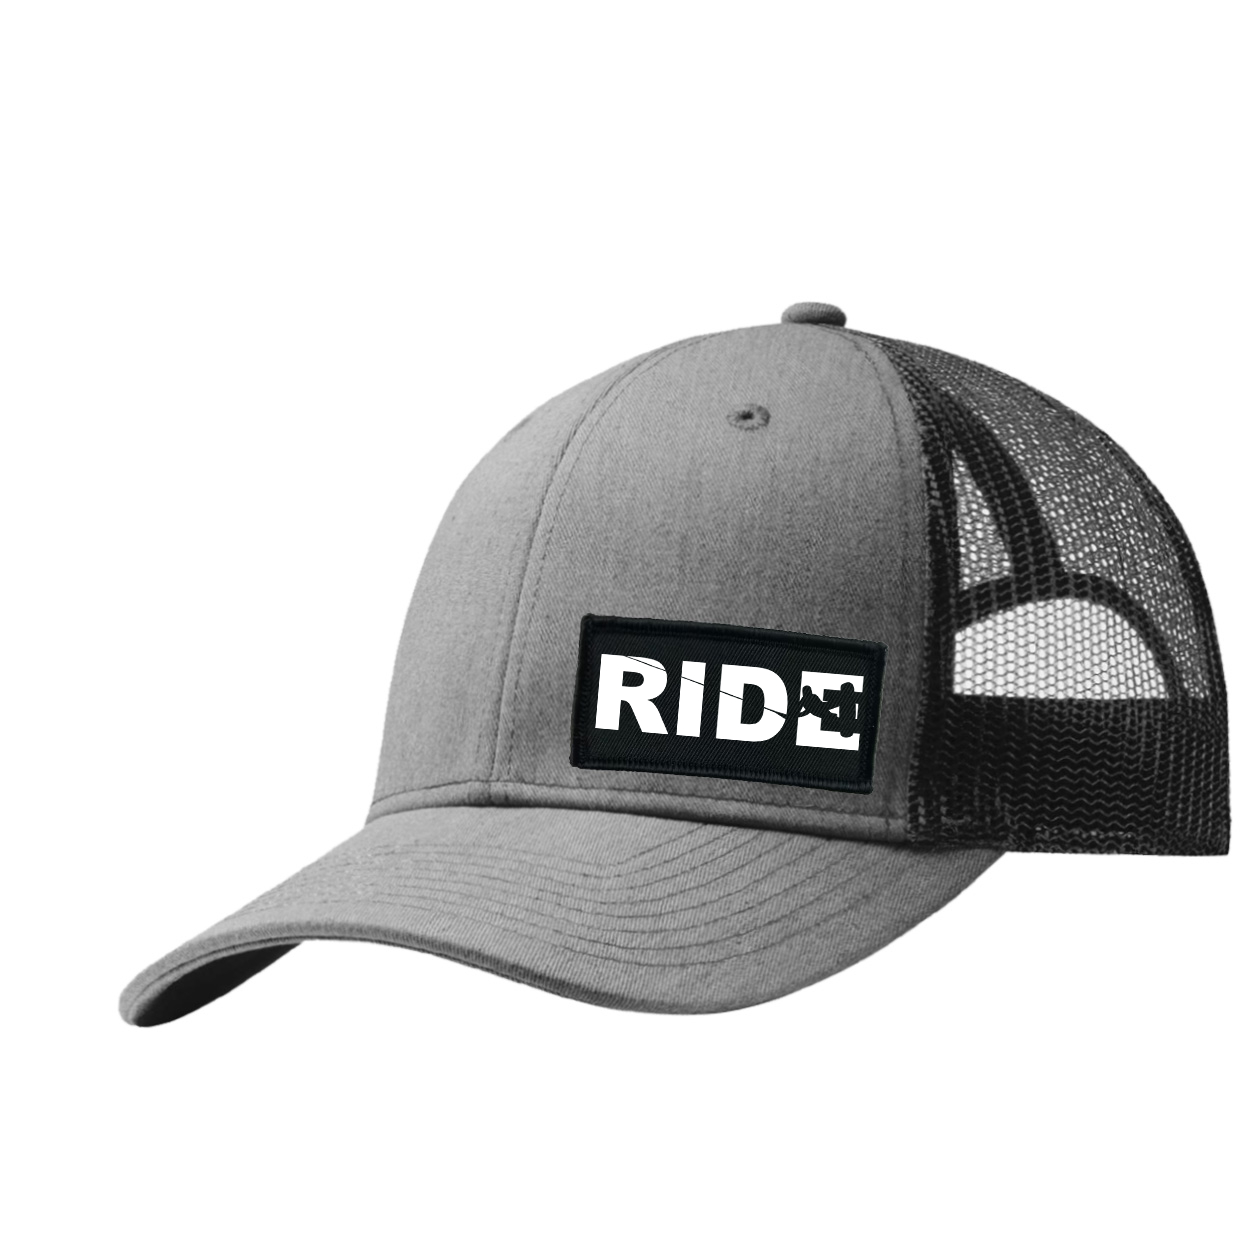 Ride Wakeboard Logo Night Out Woven Patch Snapback Trucker Hat Heather Gray/Black (White Logo)